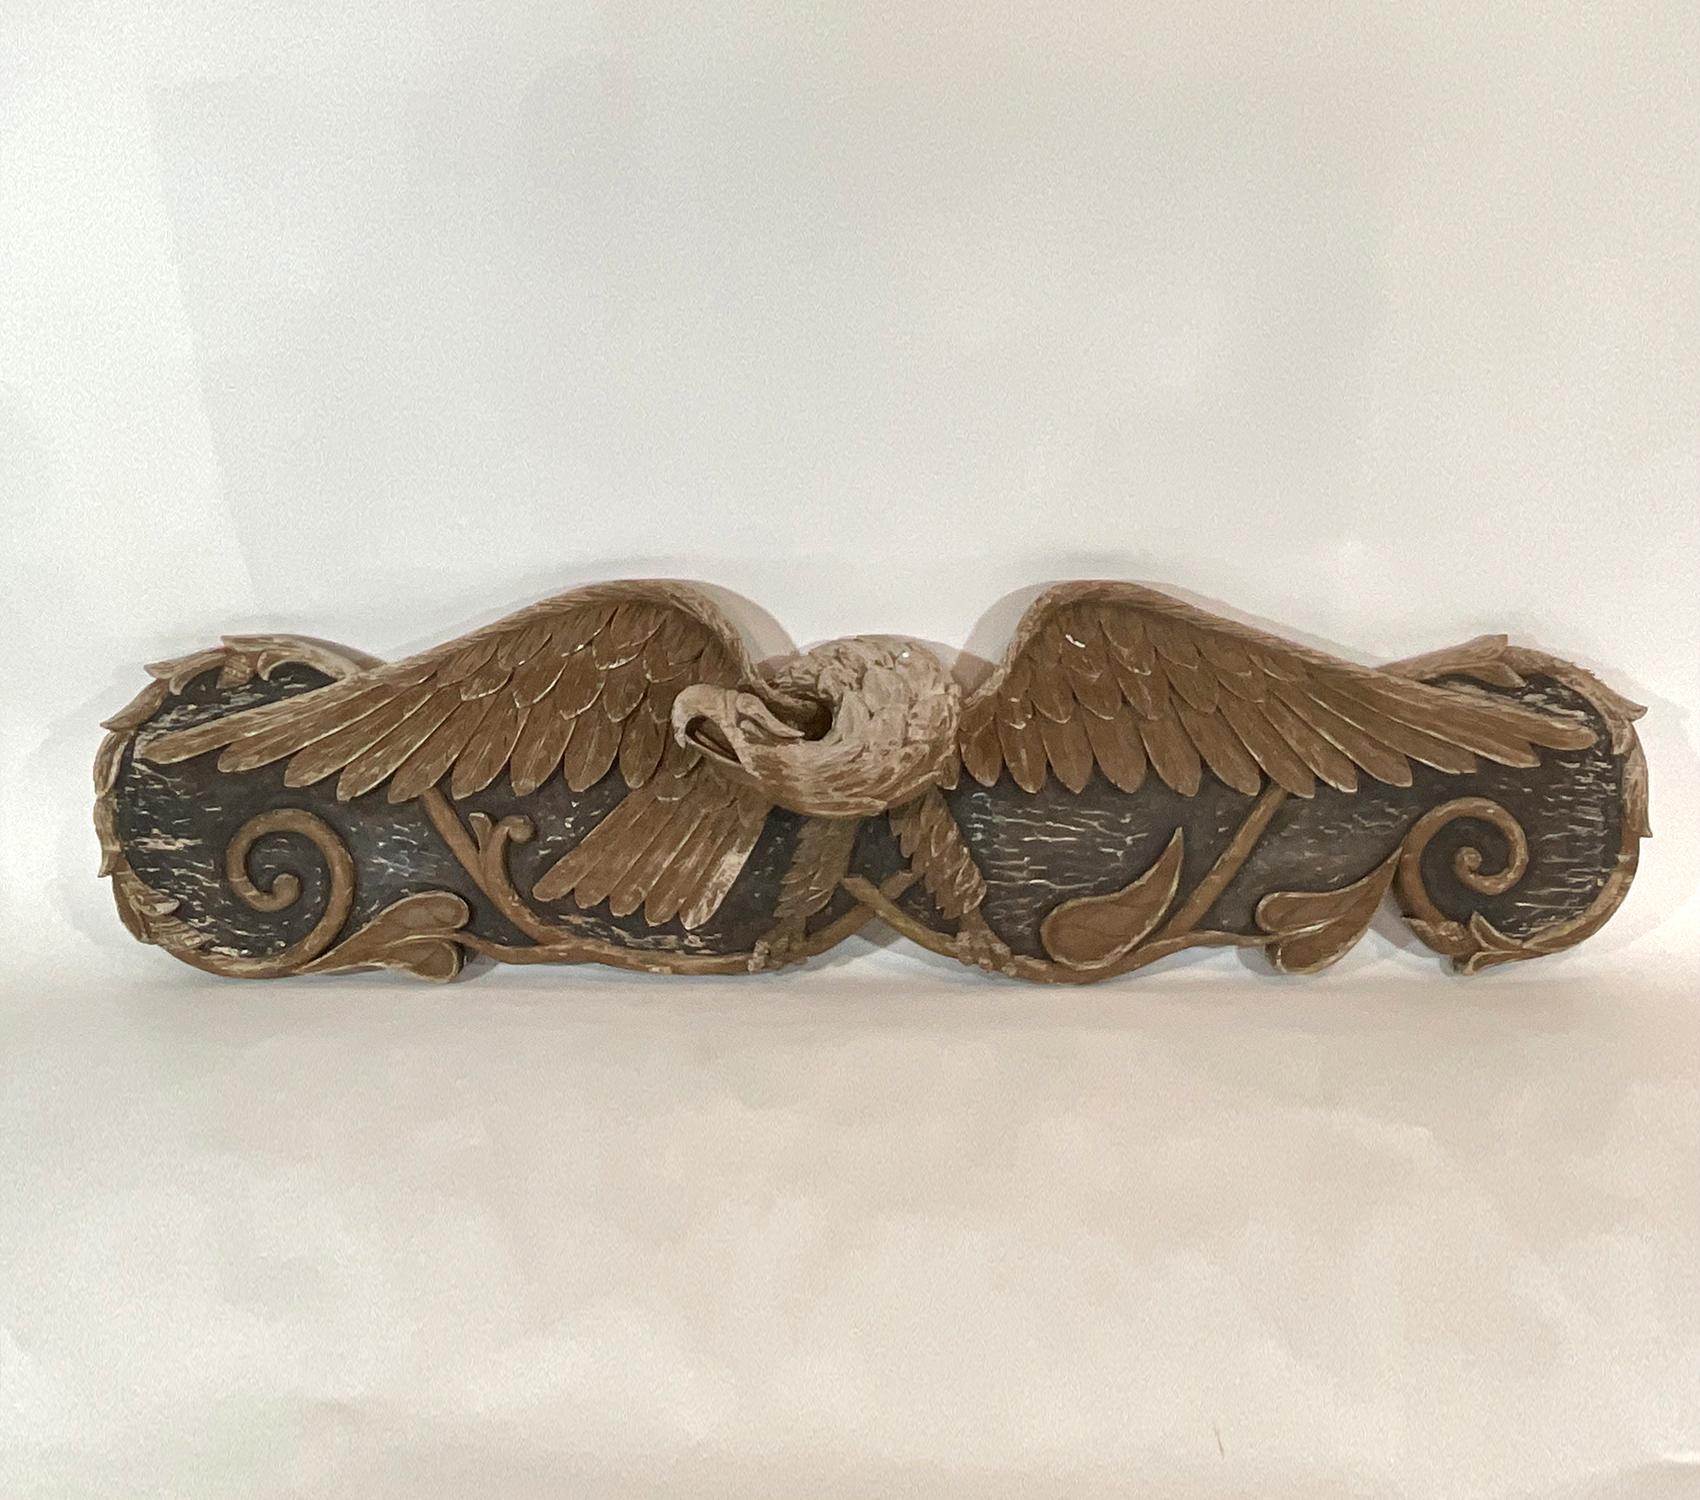 Great old late Nineteenth Century carved stern board eagle carving. Distressed finish. Finely executed probably by a Maine carver, possibly Bellamy.

Weight: 24 LBS
Overall Dimensions: 18” H x 72” L x 6” D
Made: America
Material: Wood
Date: